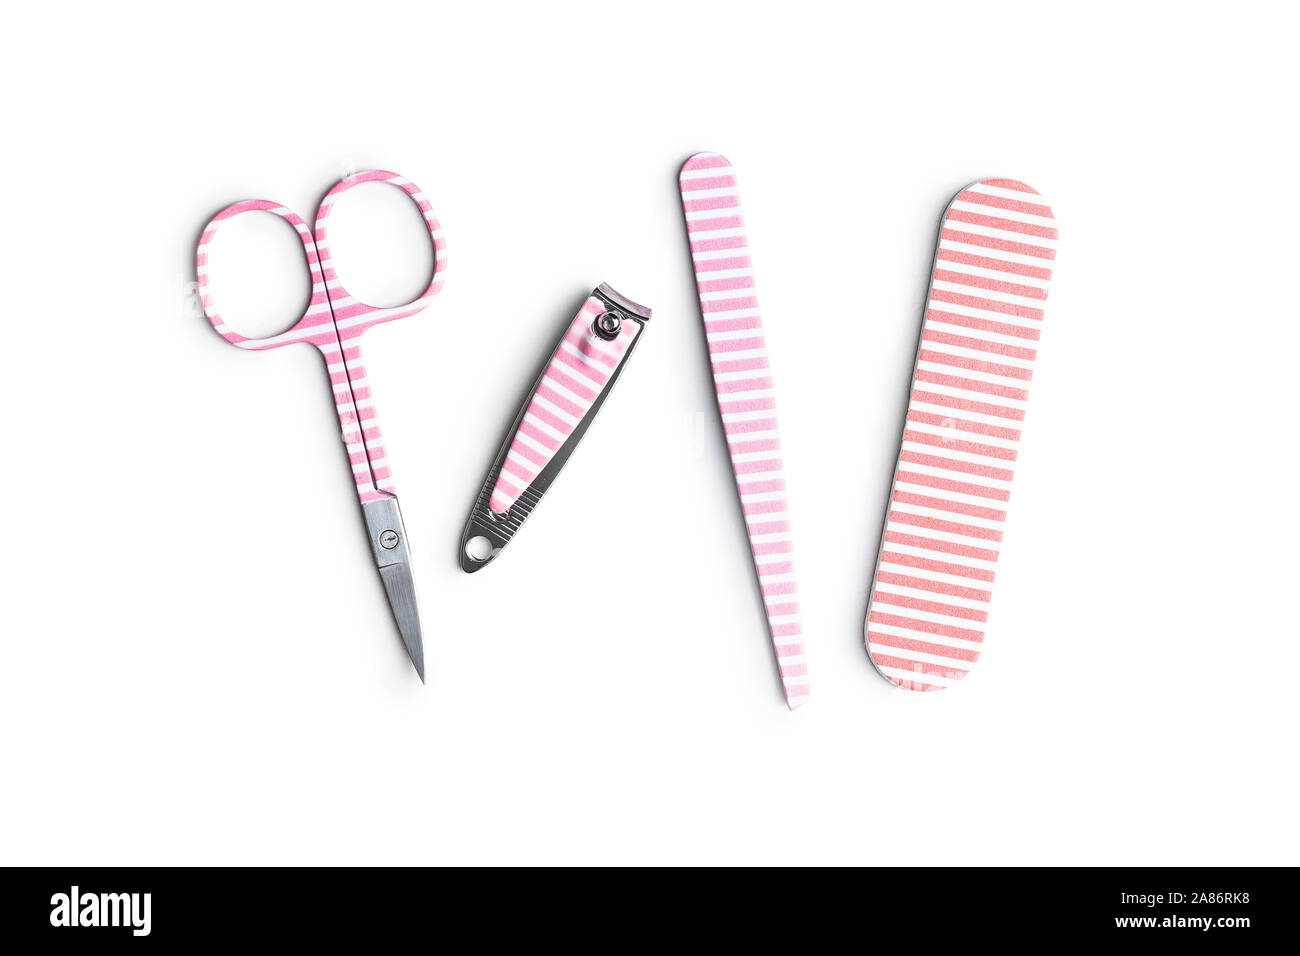 Pink manicure tools. Nail scissors and accessories isolated on white background. Stock Photo